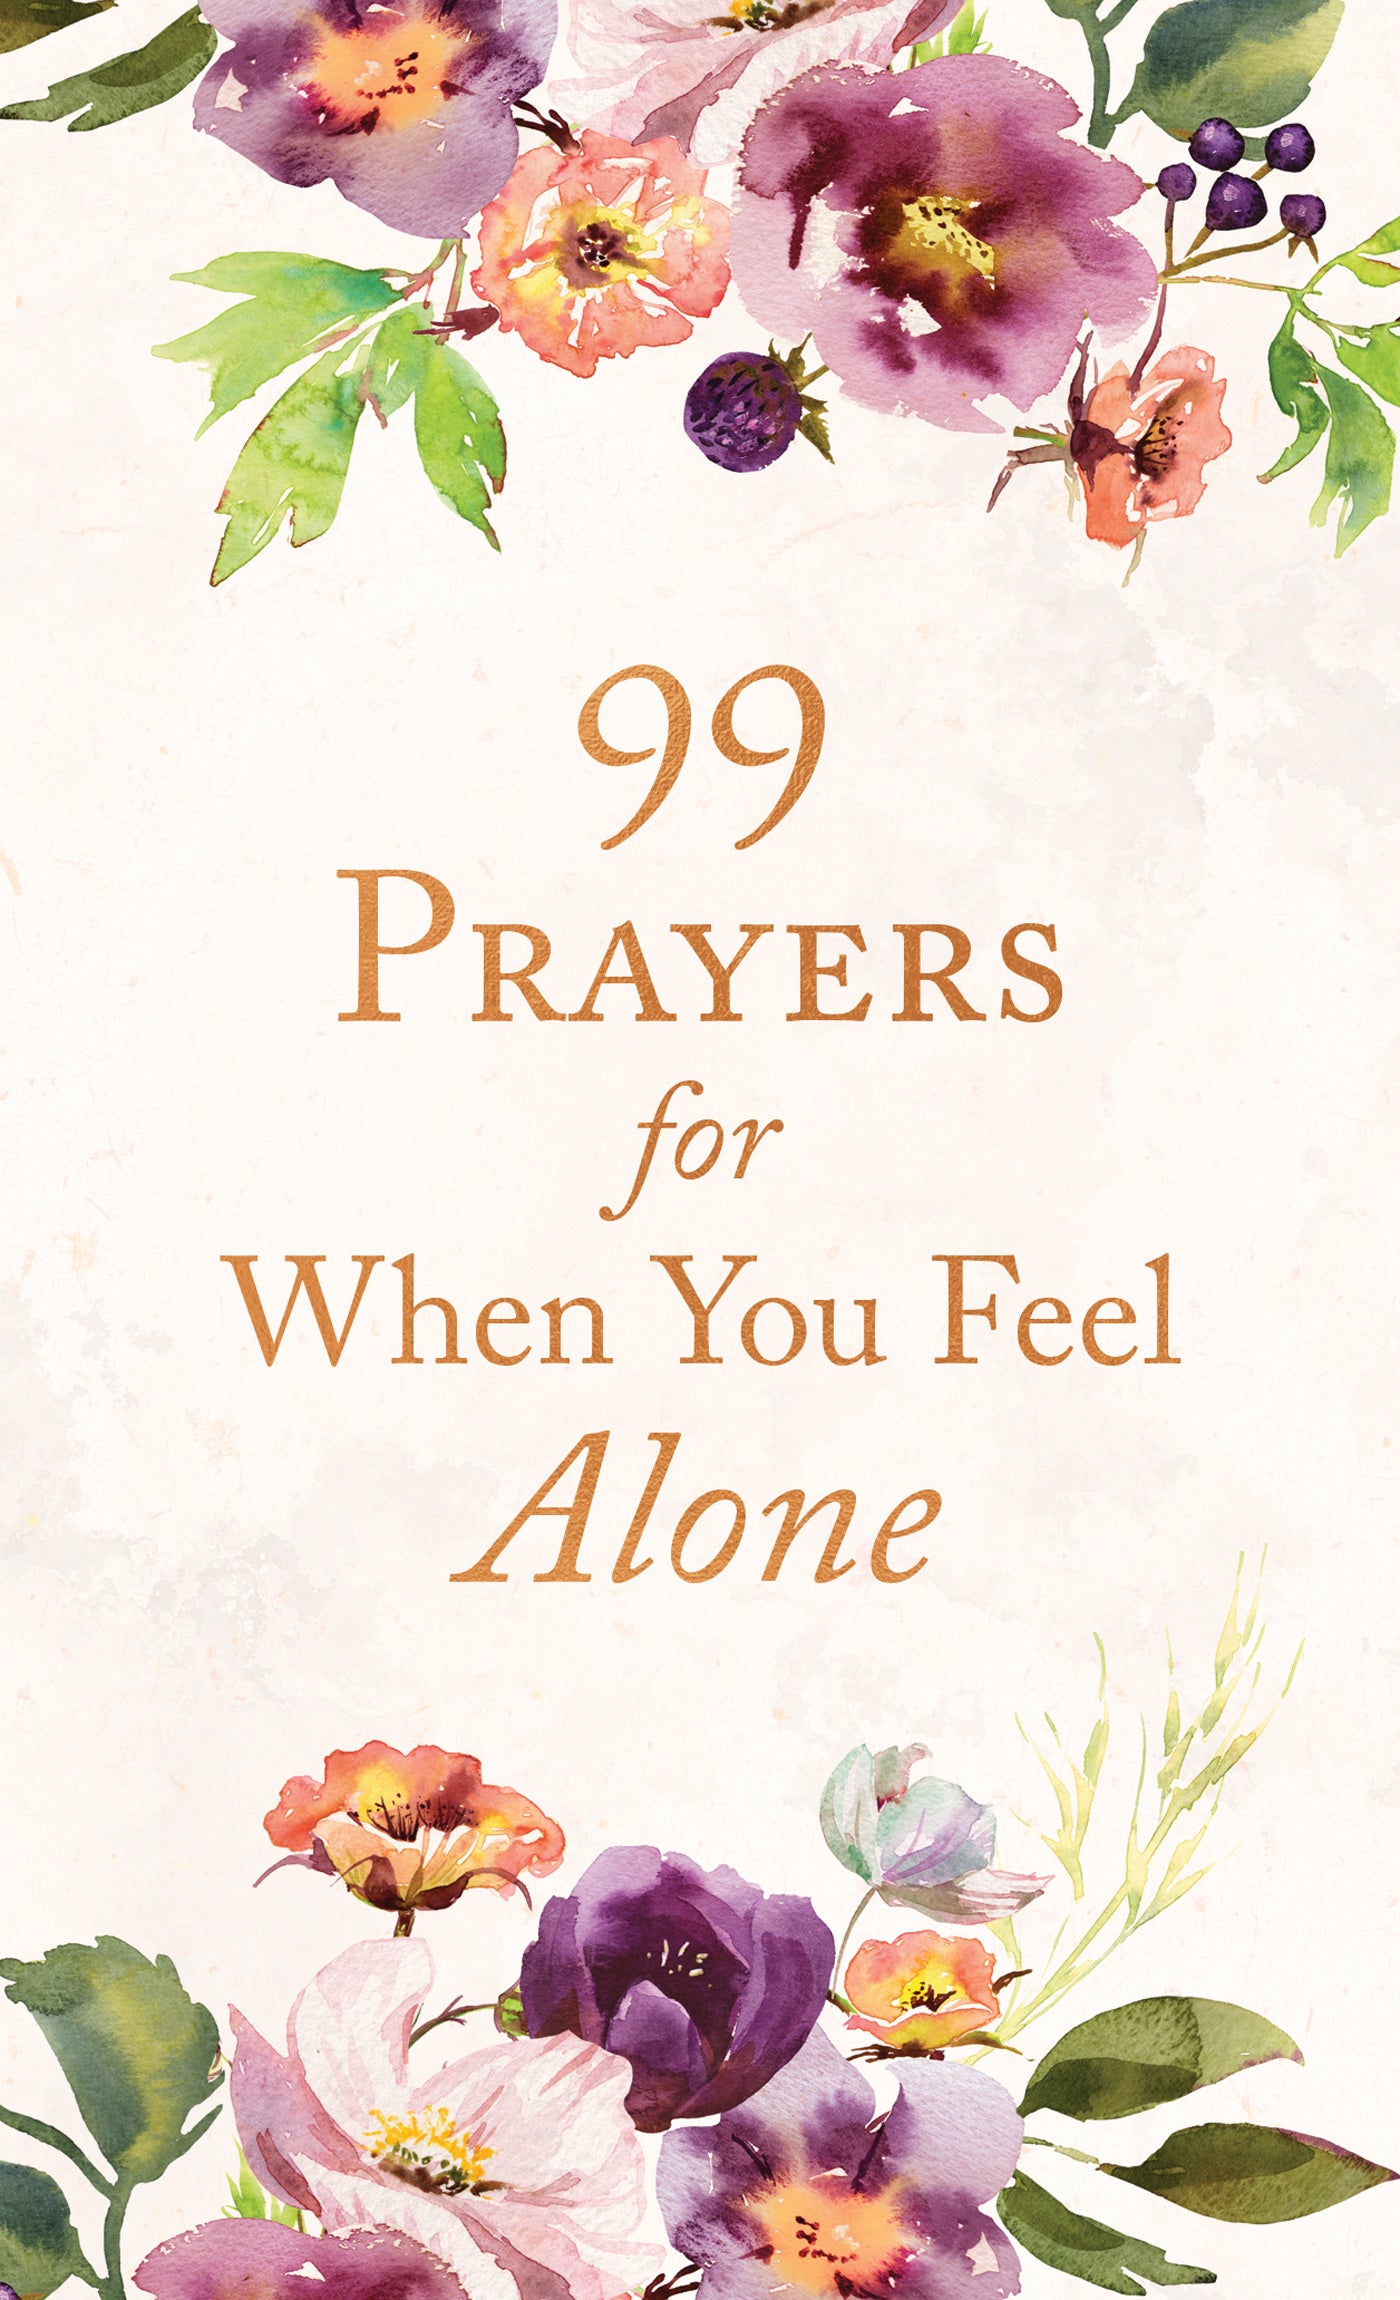 99 Prayers for When You Feel Alone - The Christian Gift Company